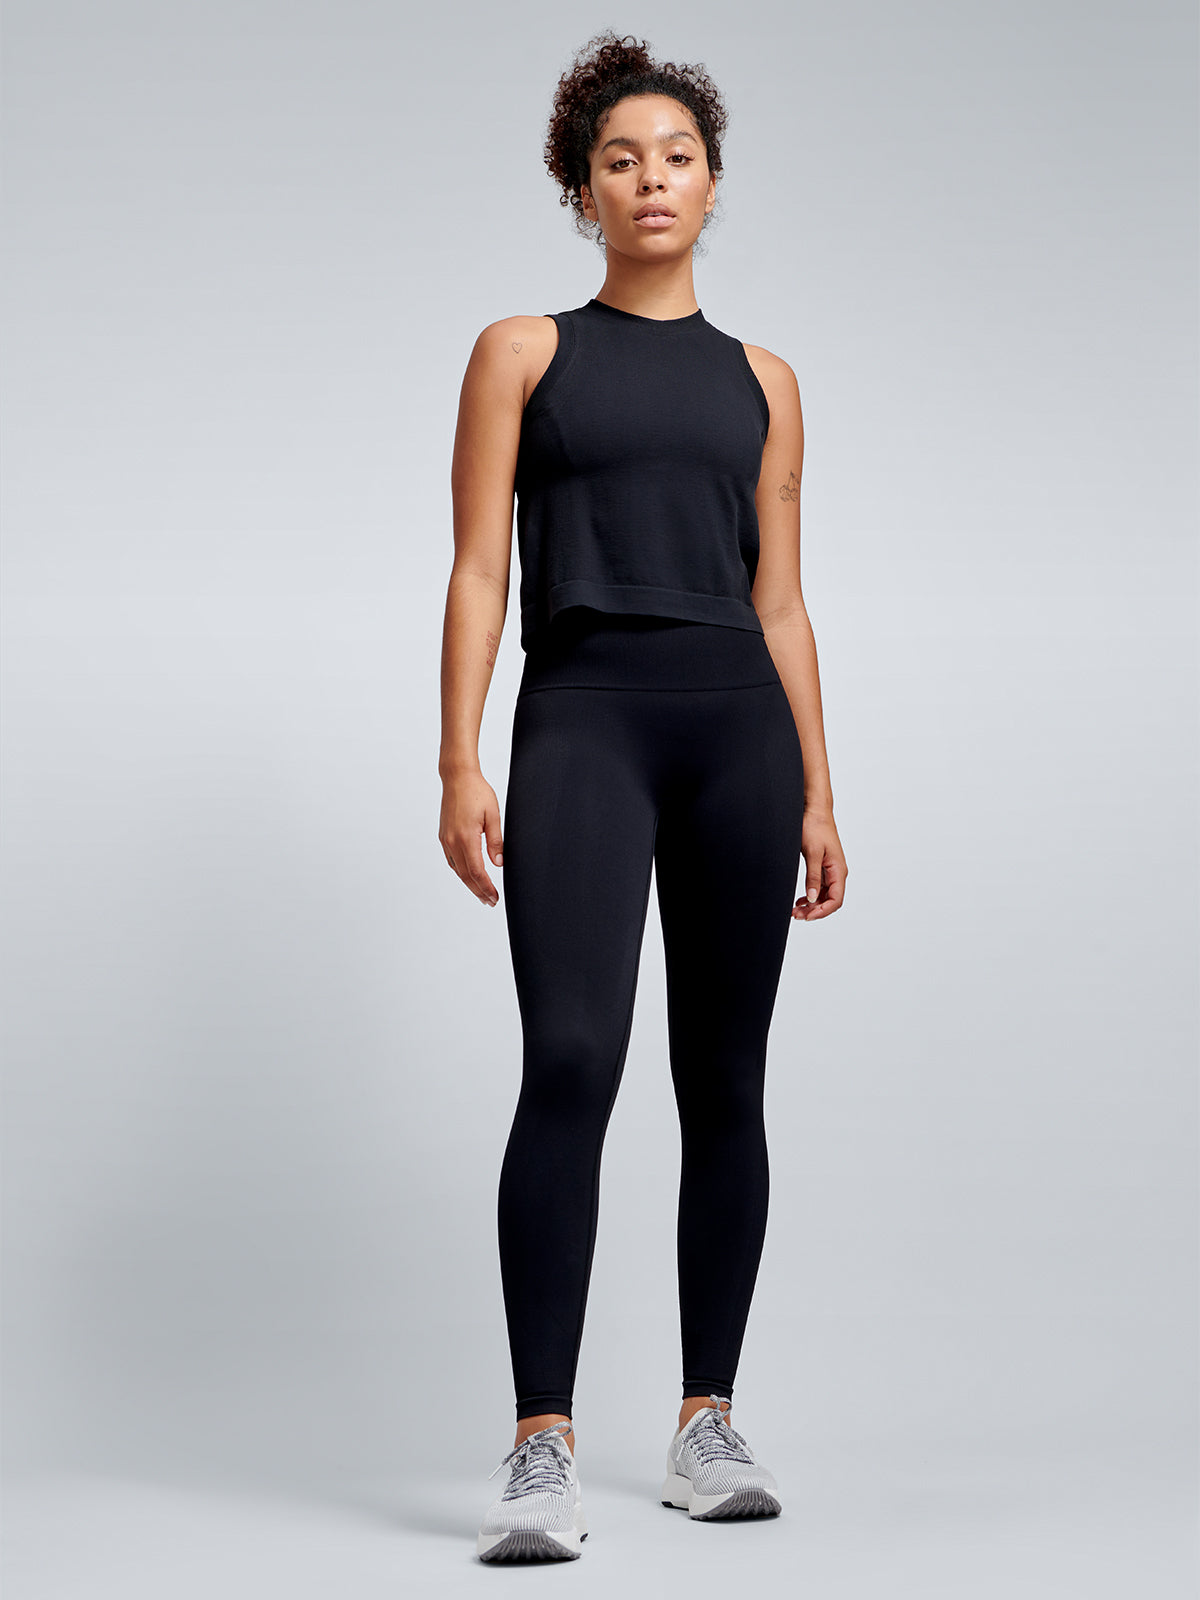 HERE TODAY Cropped Tank Black – LNDR